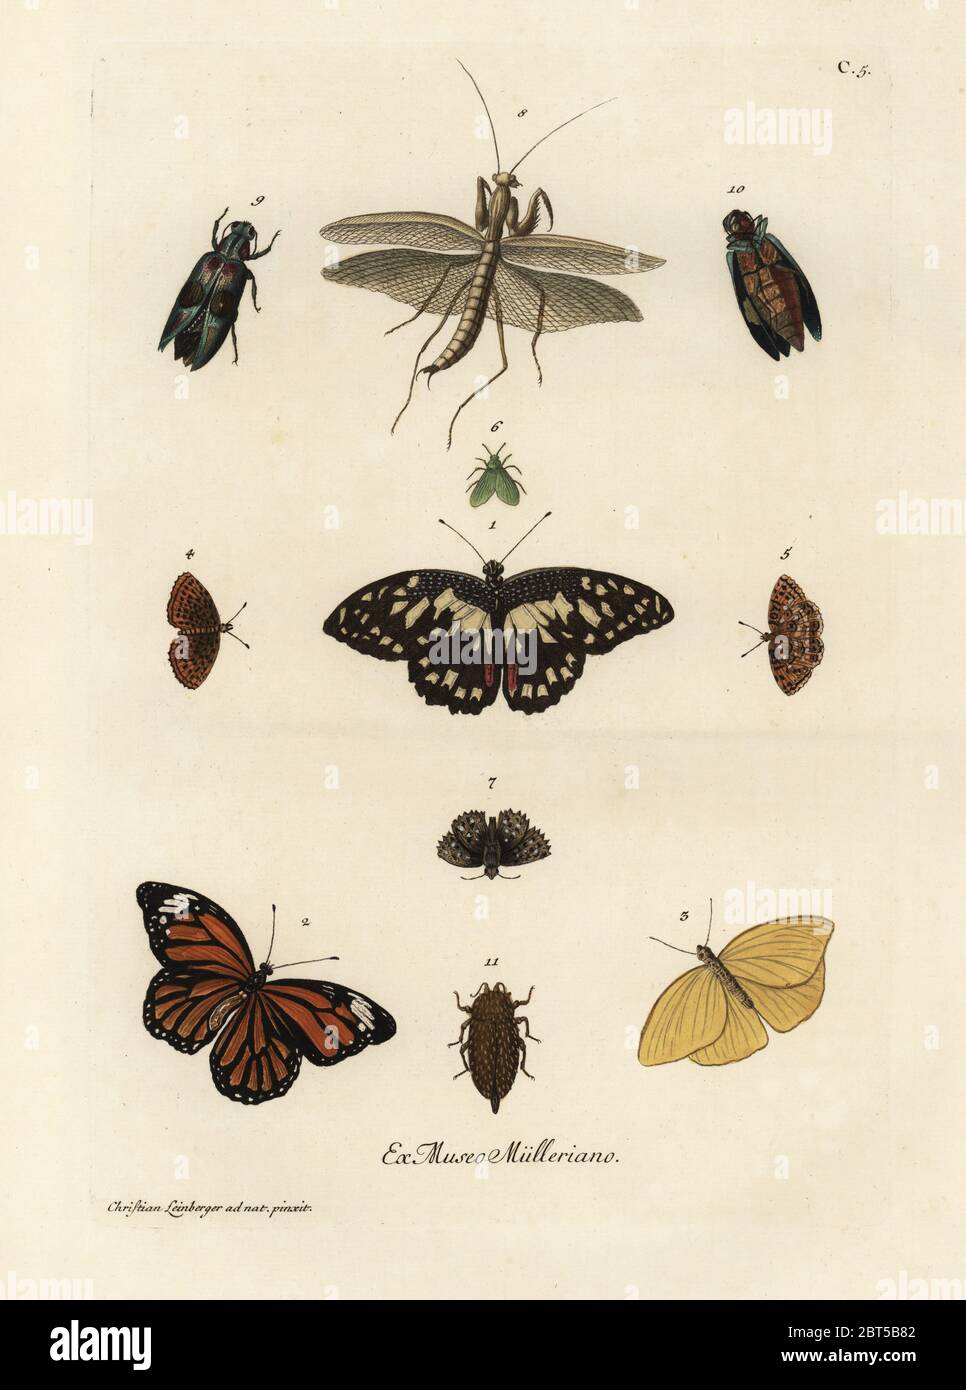 Varieties of butterflies, moths and insects. Handcoloured copperplate engraving after an illustration by Christian Leinberger from Georg Wolfgang Knorr's Deliciae Naturae Selectae of Kabinet van Zeldzaamheden der Natuur, Blusse and Son, Nuremberg, 1771. Specimens from a Wunderkammer or Cabinet of Curiosities owned by P.L. Muller. Stock Photo